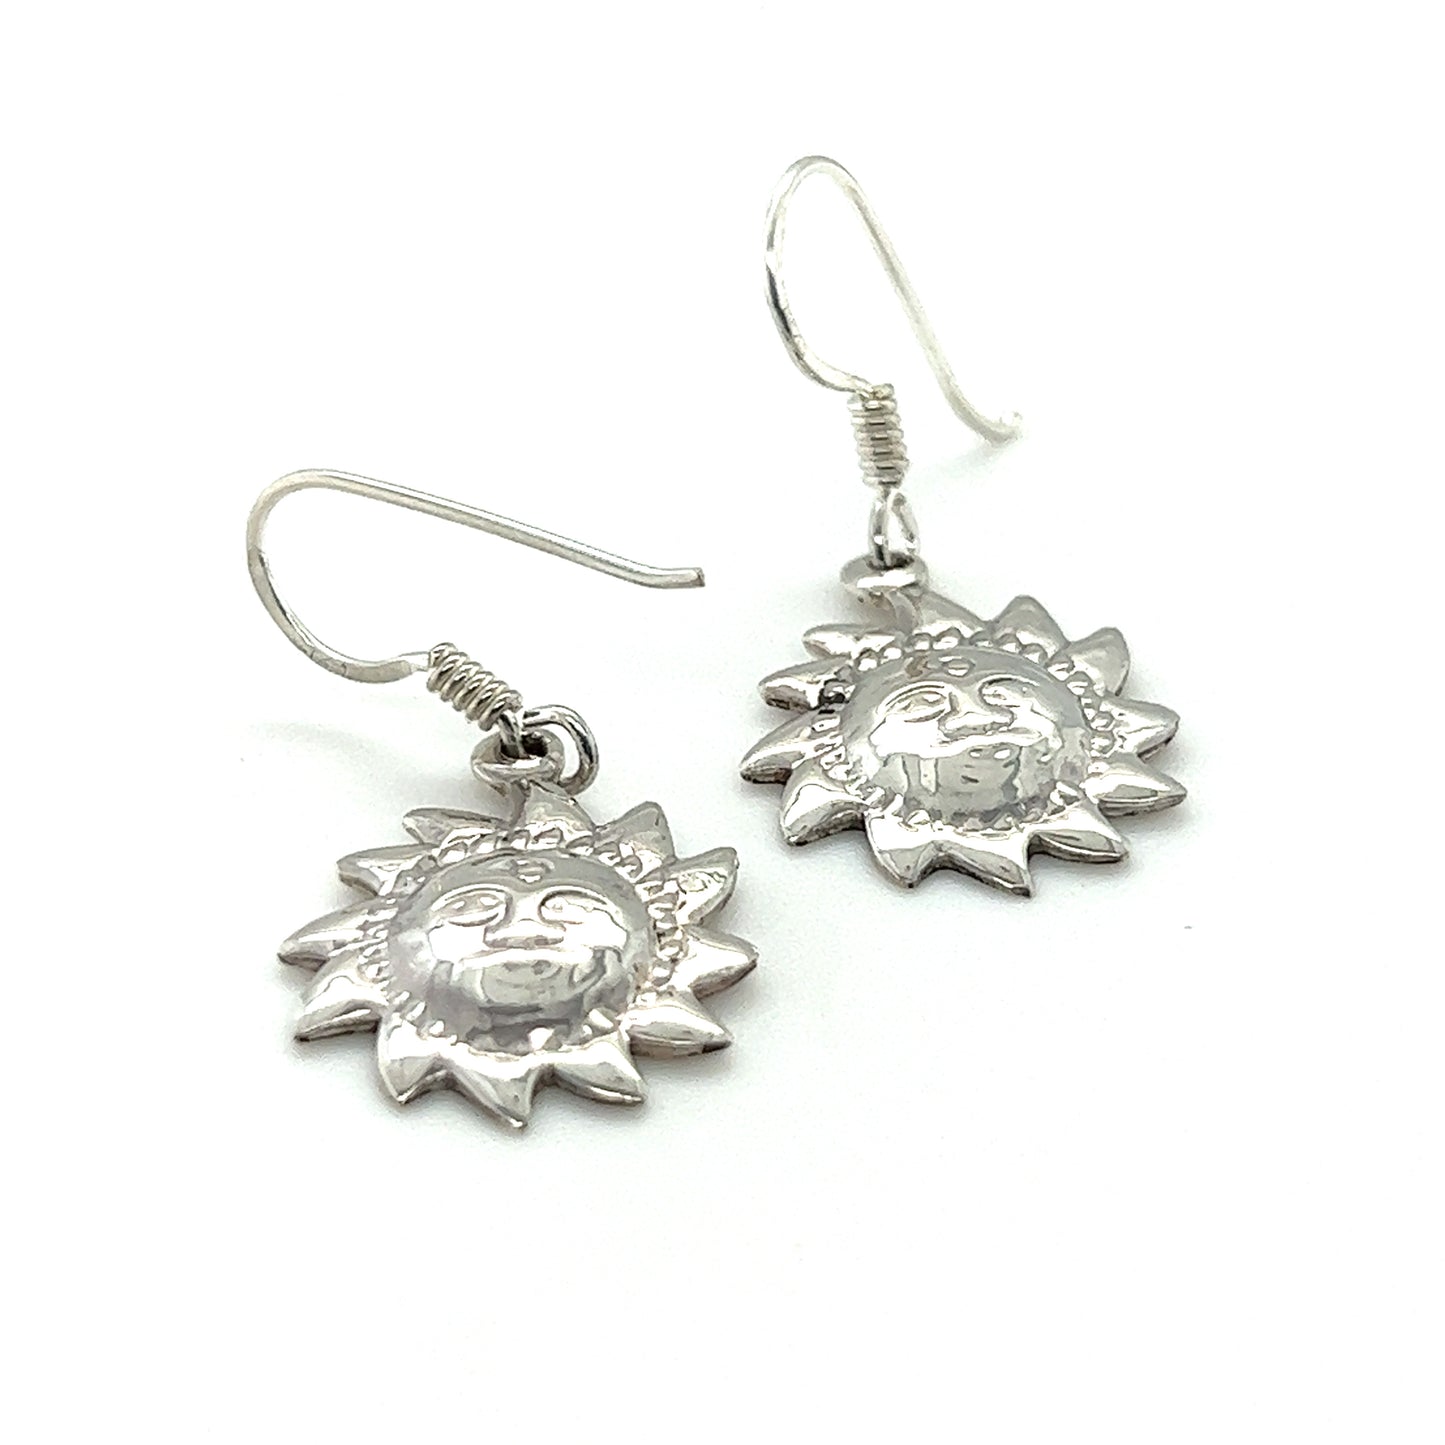 Small Super Silver Sun with Face Earrings with symbolic power.